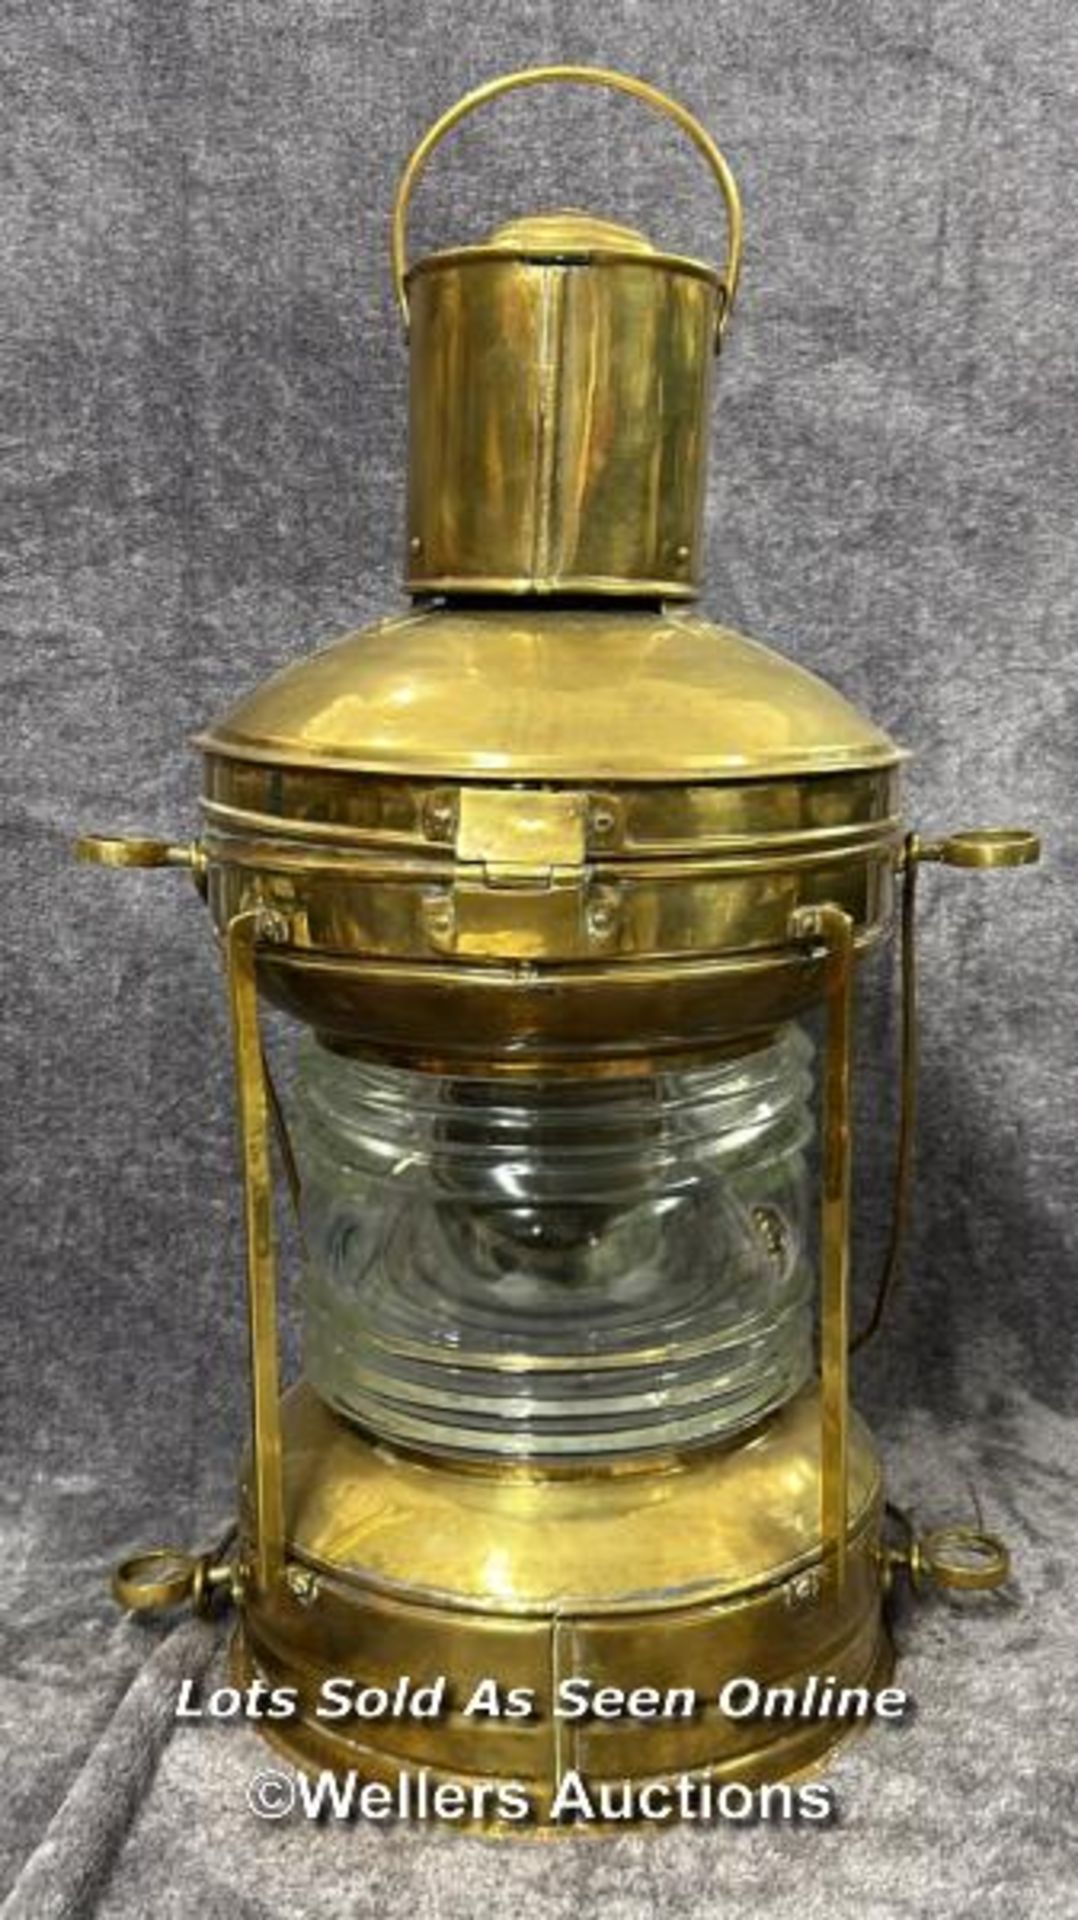 Large brass Davey's ships lantern in good condition, 62cm high / AN21 - Image 7 of 8